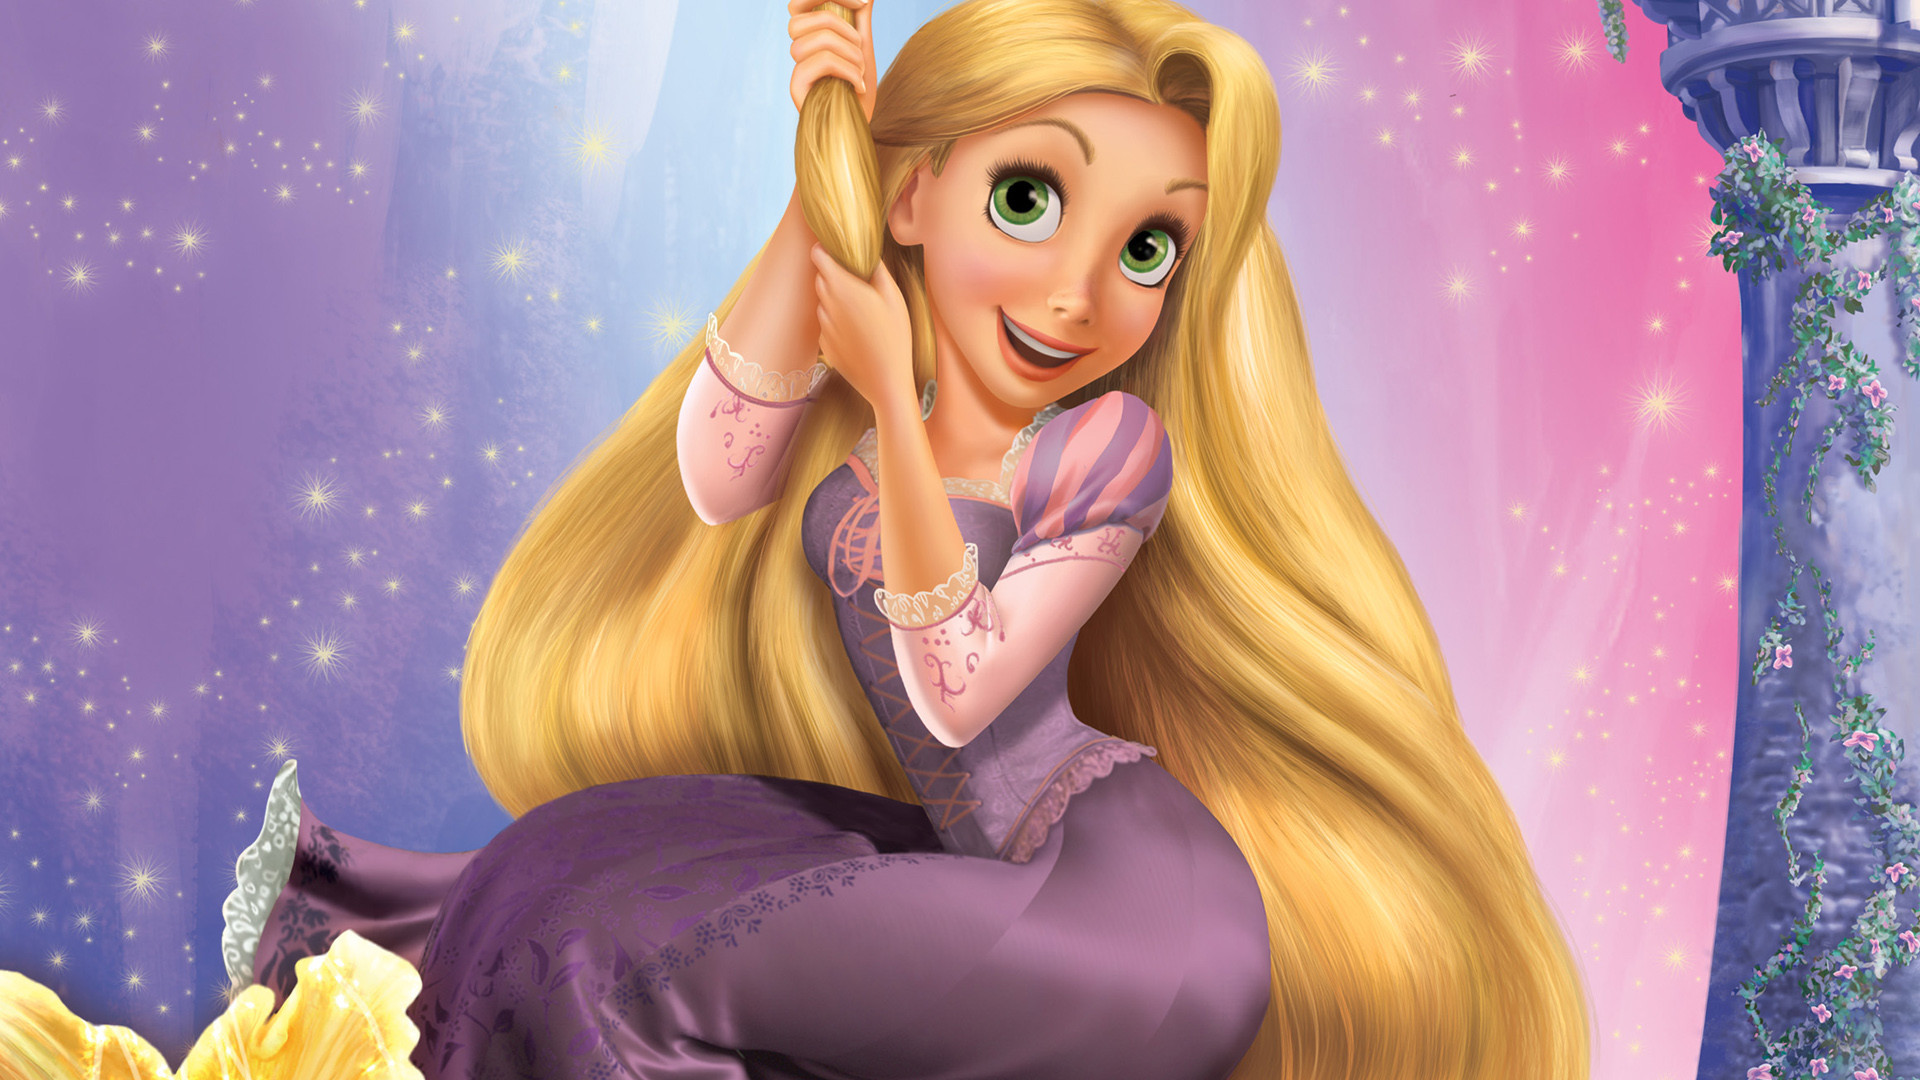 Units of Tangled Wallpaper Tangled Wallpaper Wallpapers